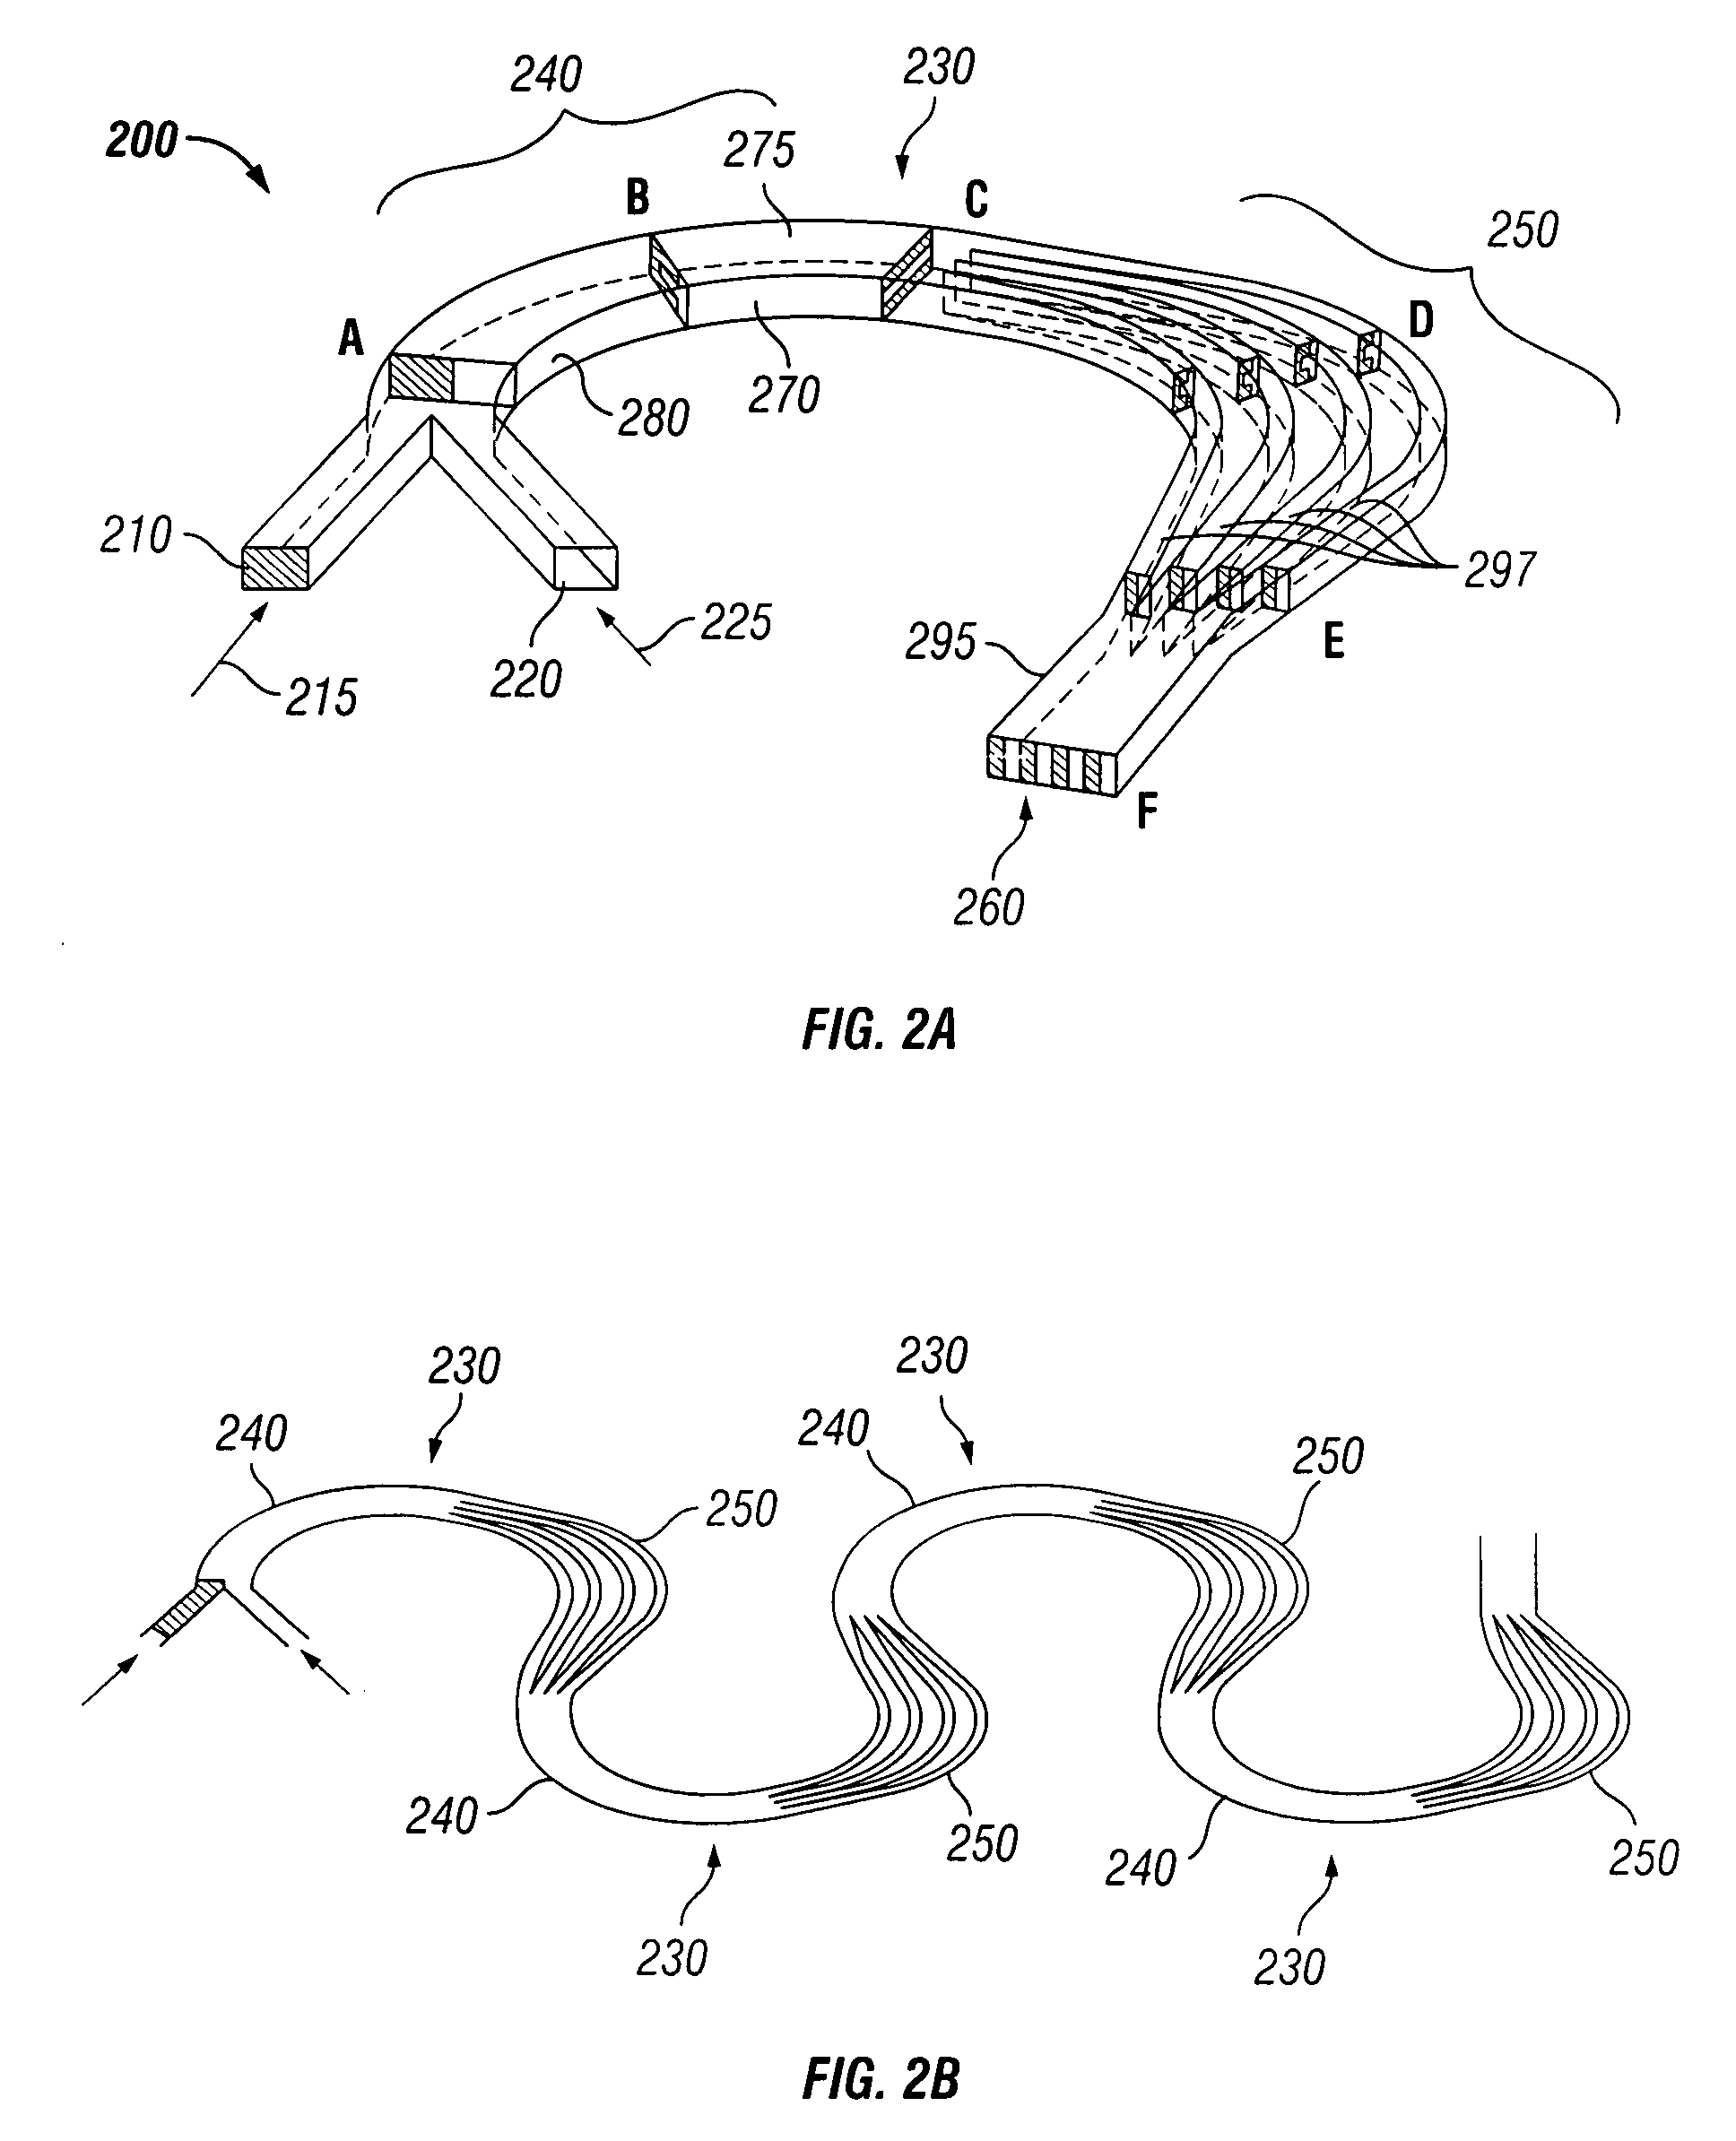 Method for mixing fluids in microfluidic channels